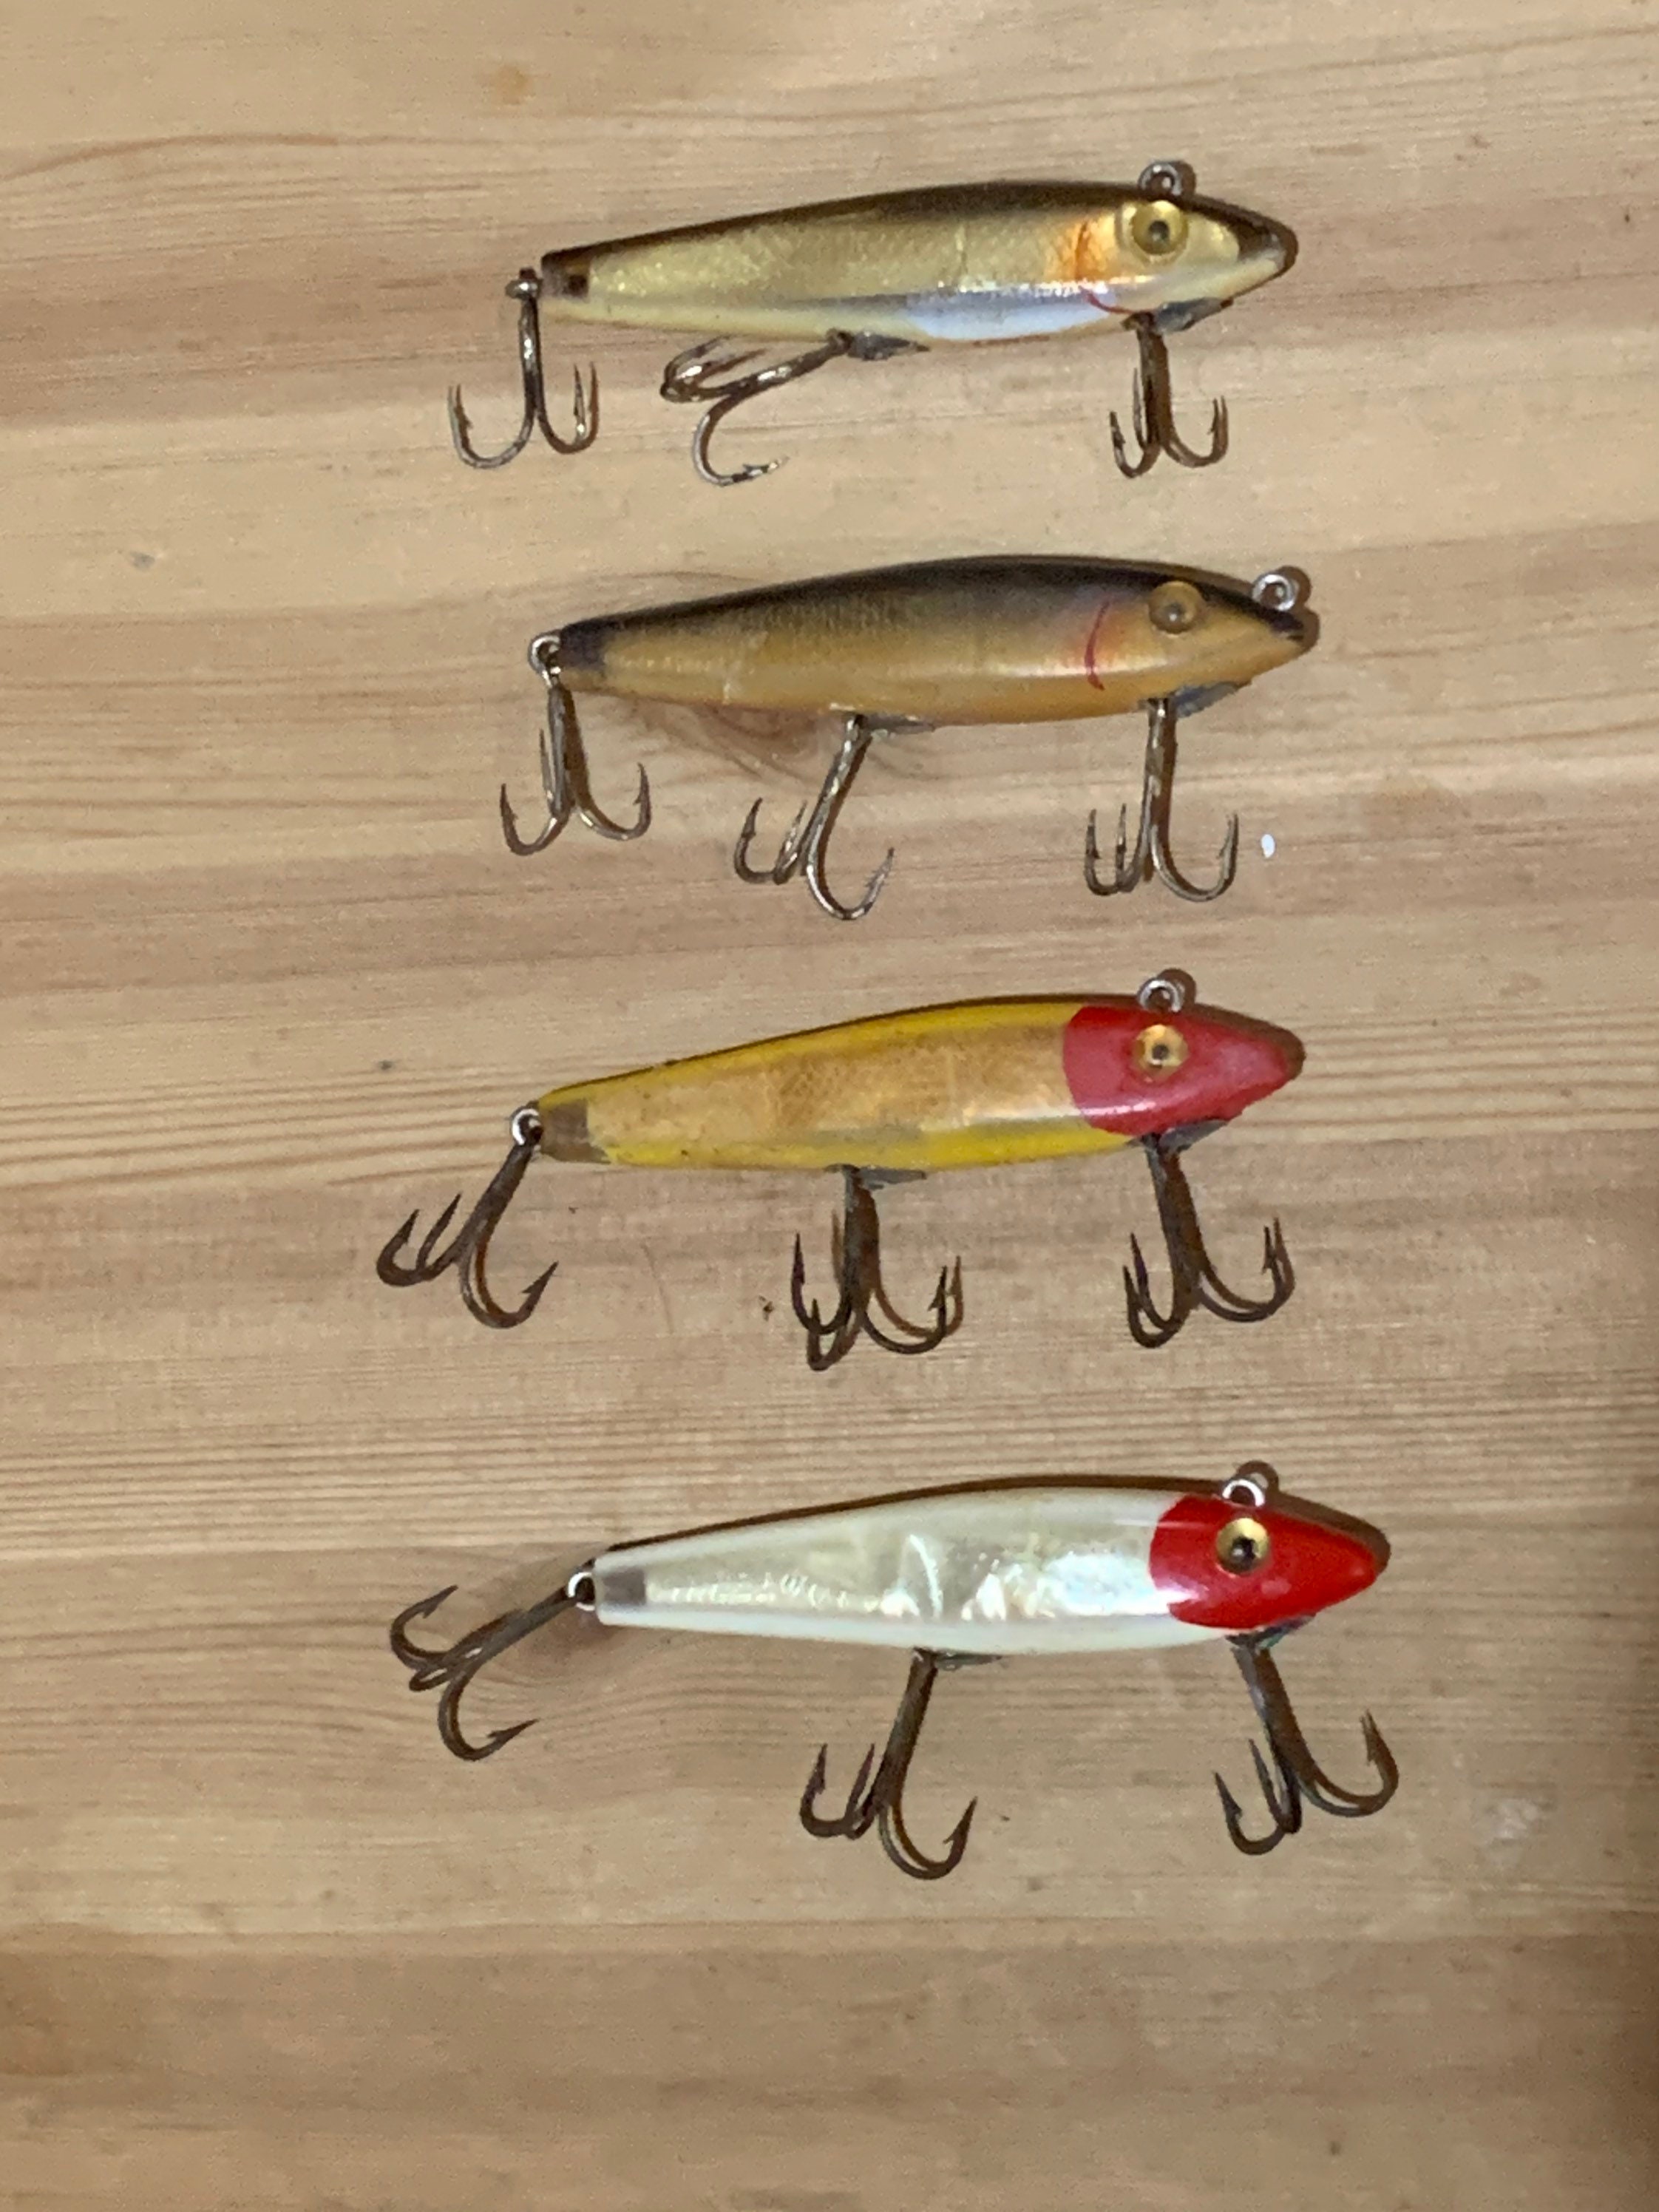 4 Vintage L&S Fishing Lures 52M11, 52M12, 52M27, 7M21 Floater -  Canada